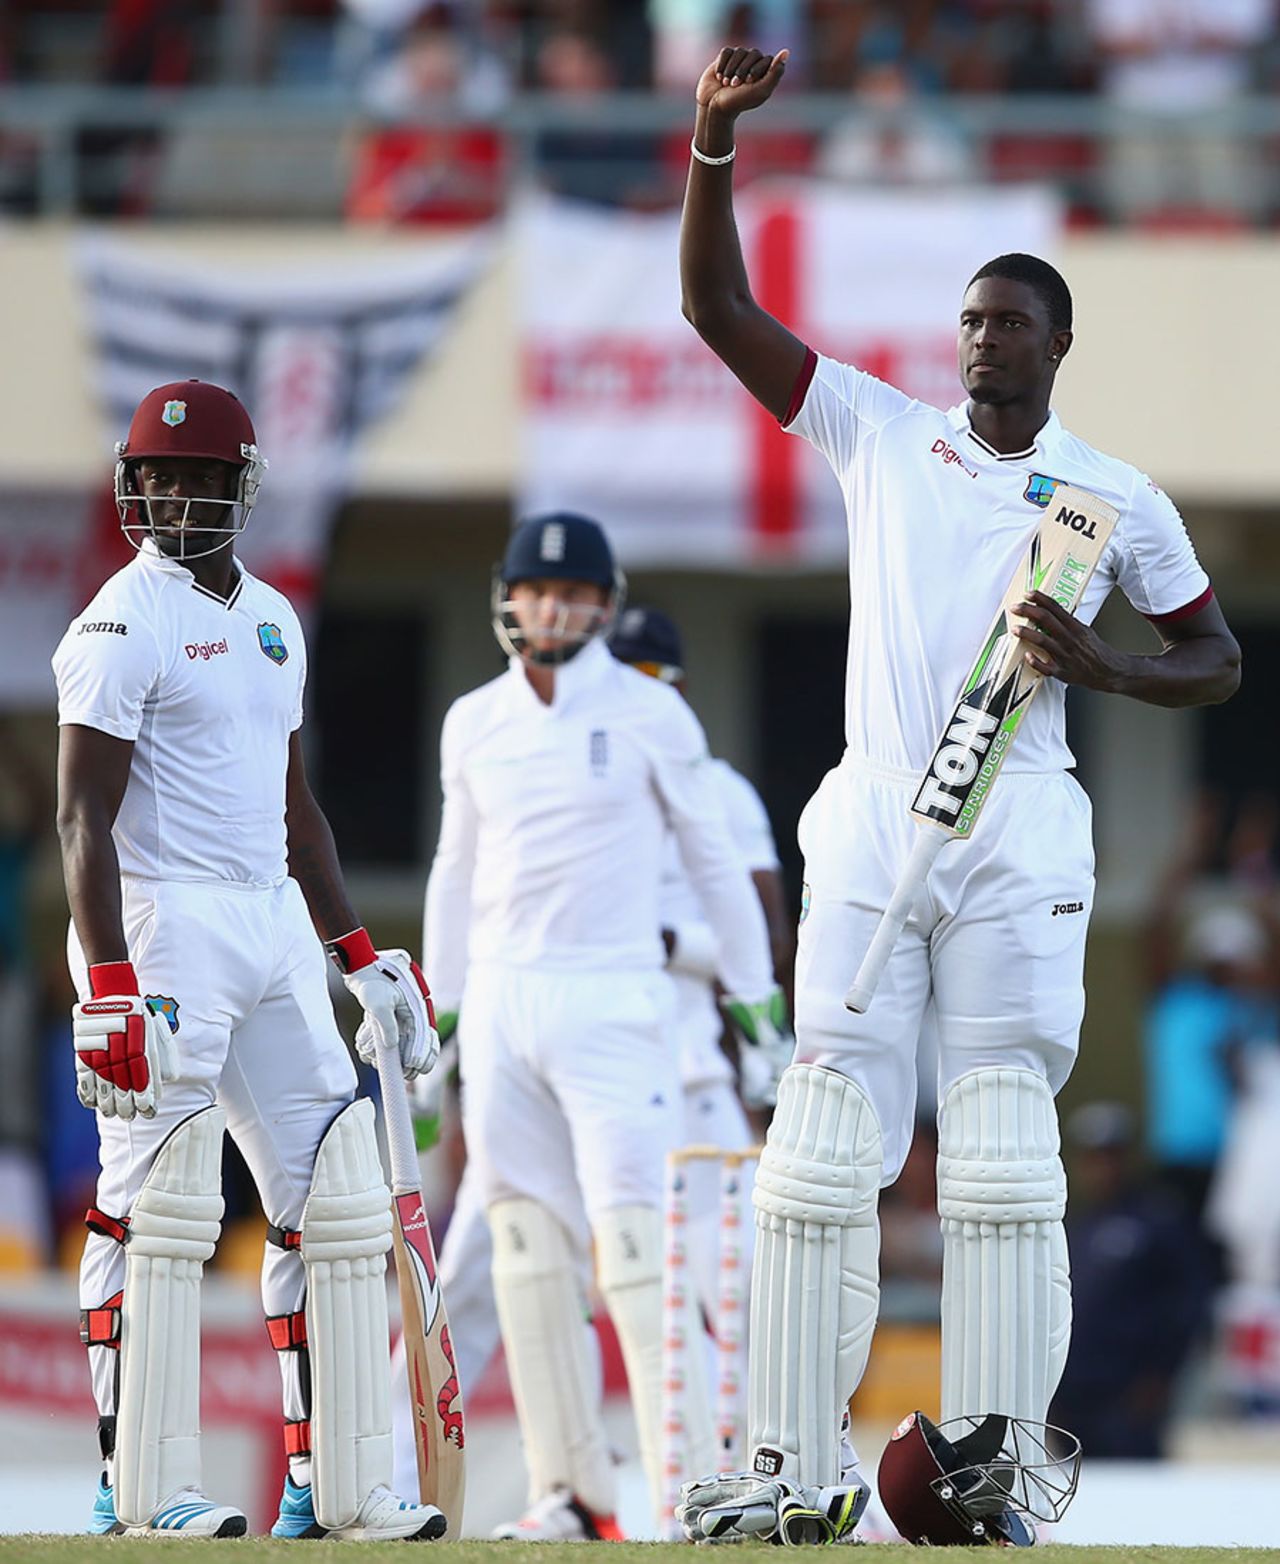 Jason Holder quietly celebrated a magnificent maiden Test, and first-class, century, West Indies v England, 1st Test, North Sound, 5th day, April 17, 2015